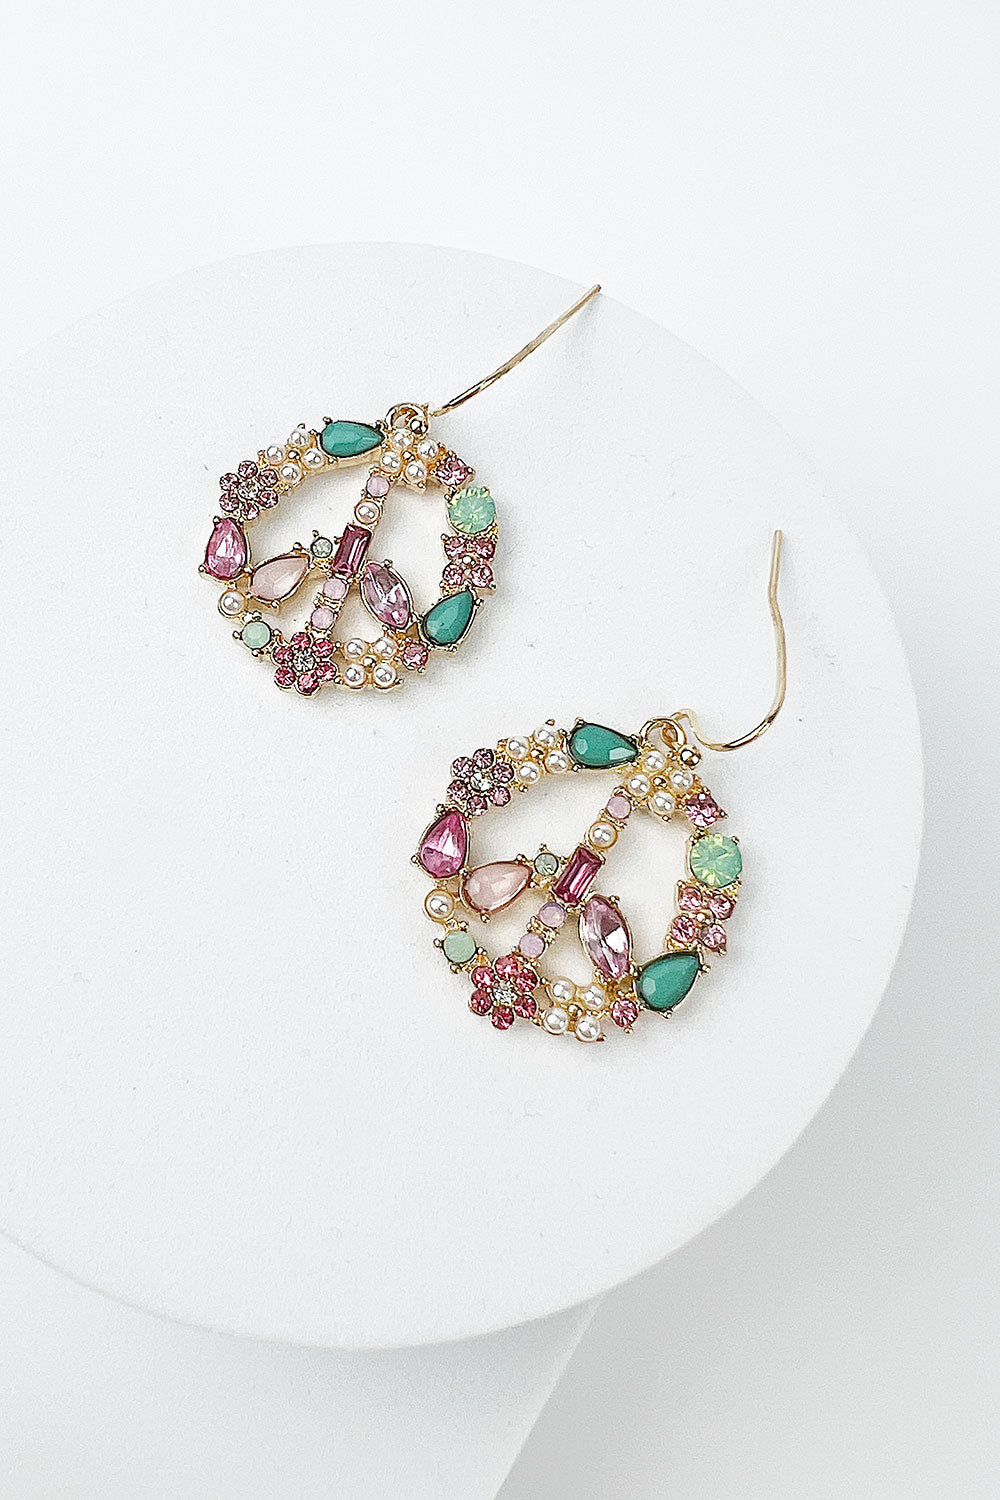 ROUND SHAPED WITH COLORFUL CRYSTALS PAVED HOOK EARRING